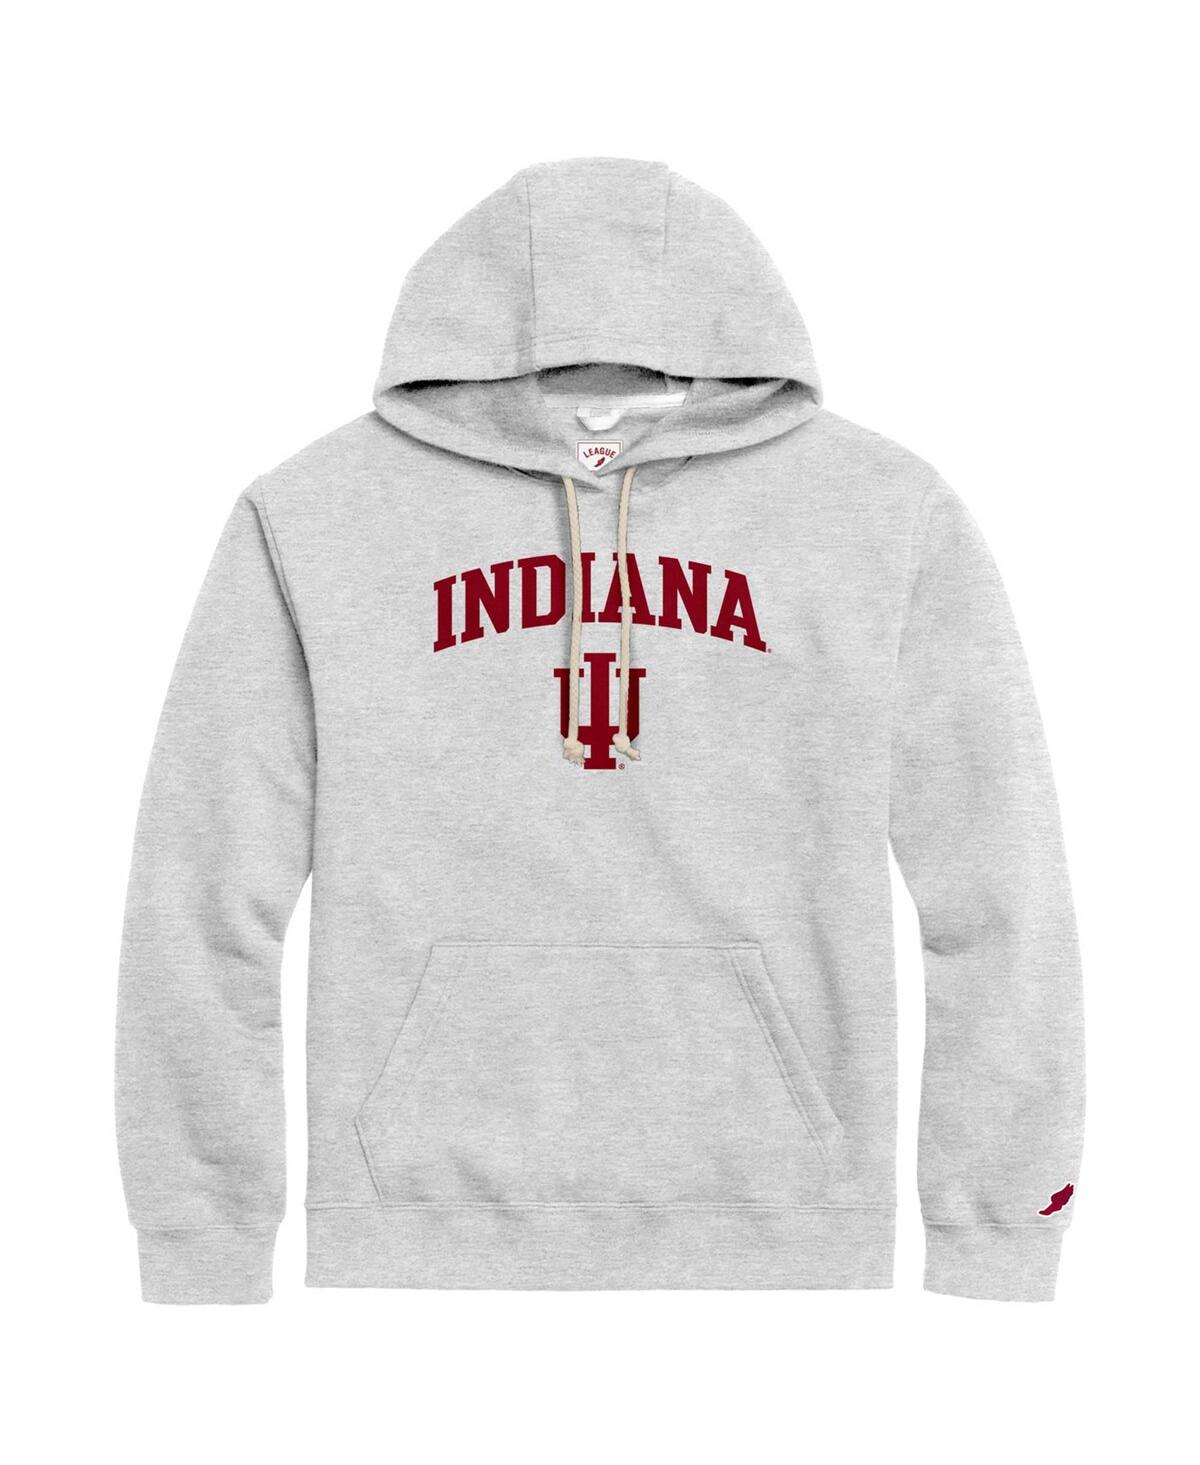 Men's League Collegiate Wear Heather Gray Distressed Indiana Hoosiers Tall Arch Essential Pullover Hoodie - Heather Gray